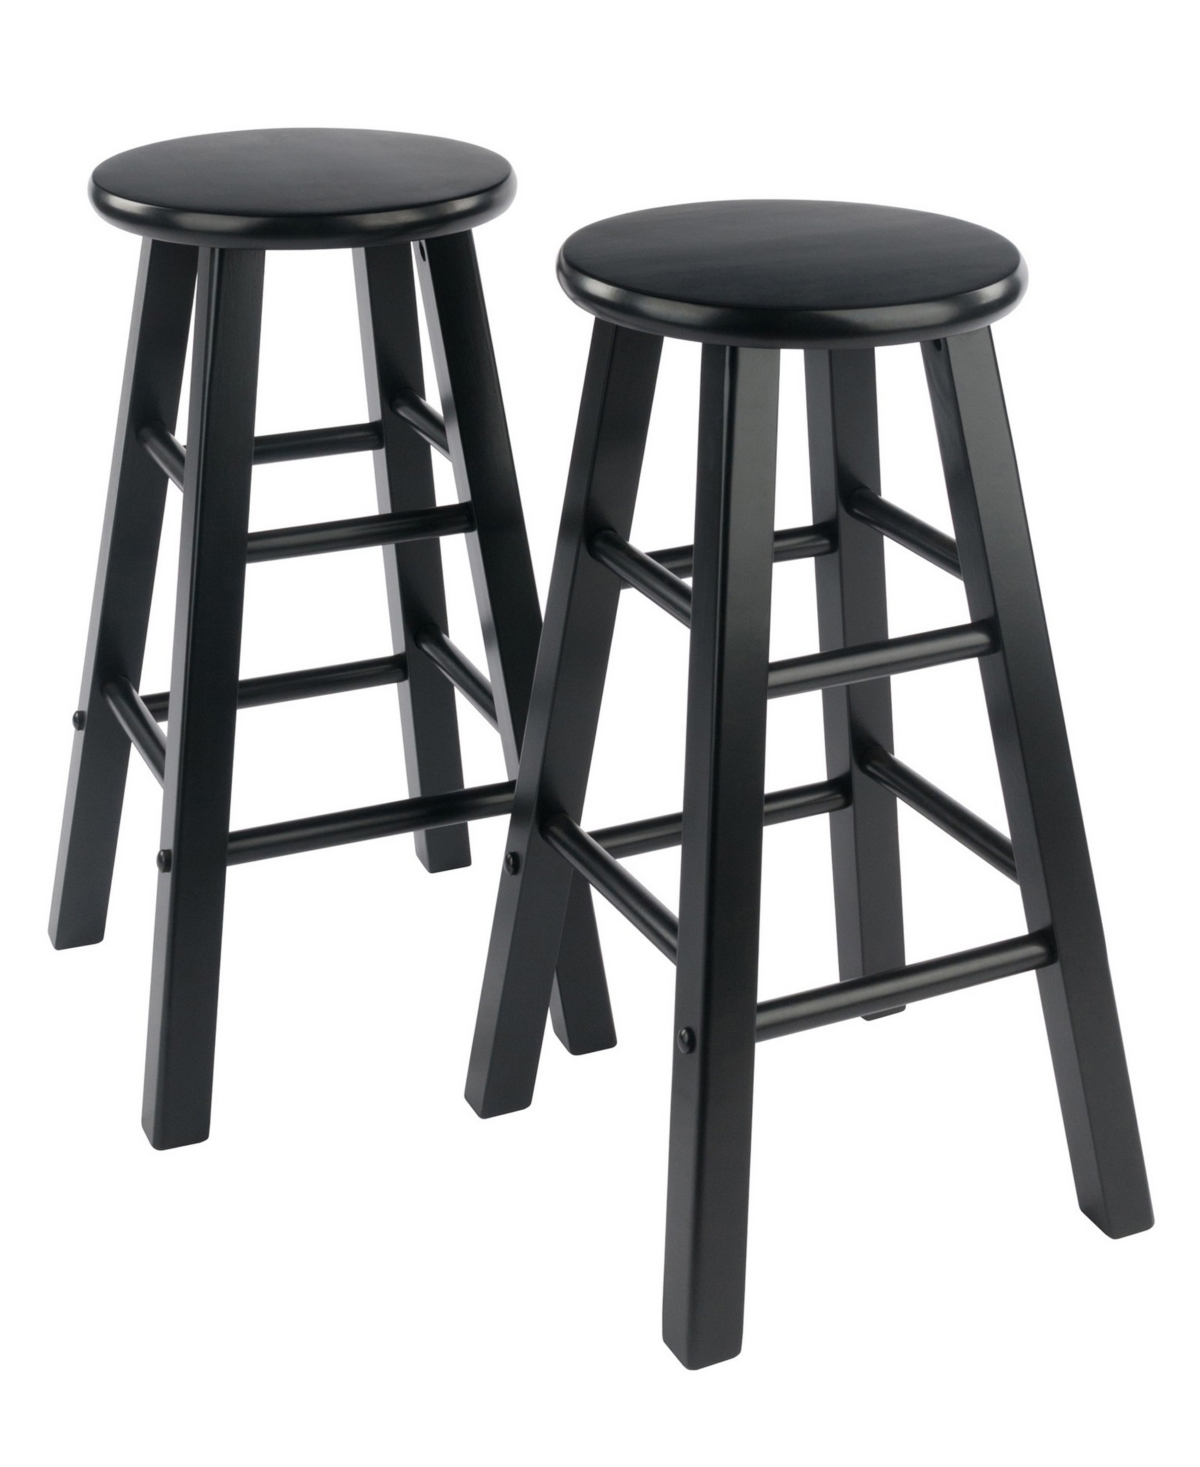 Winsome Element 2-piece Wood Counter Stool Set In Black